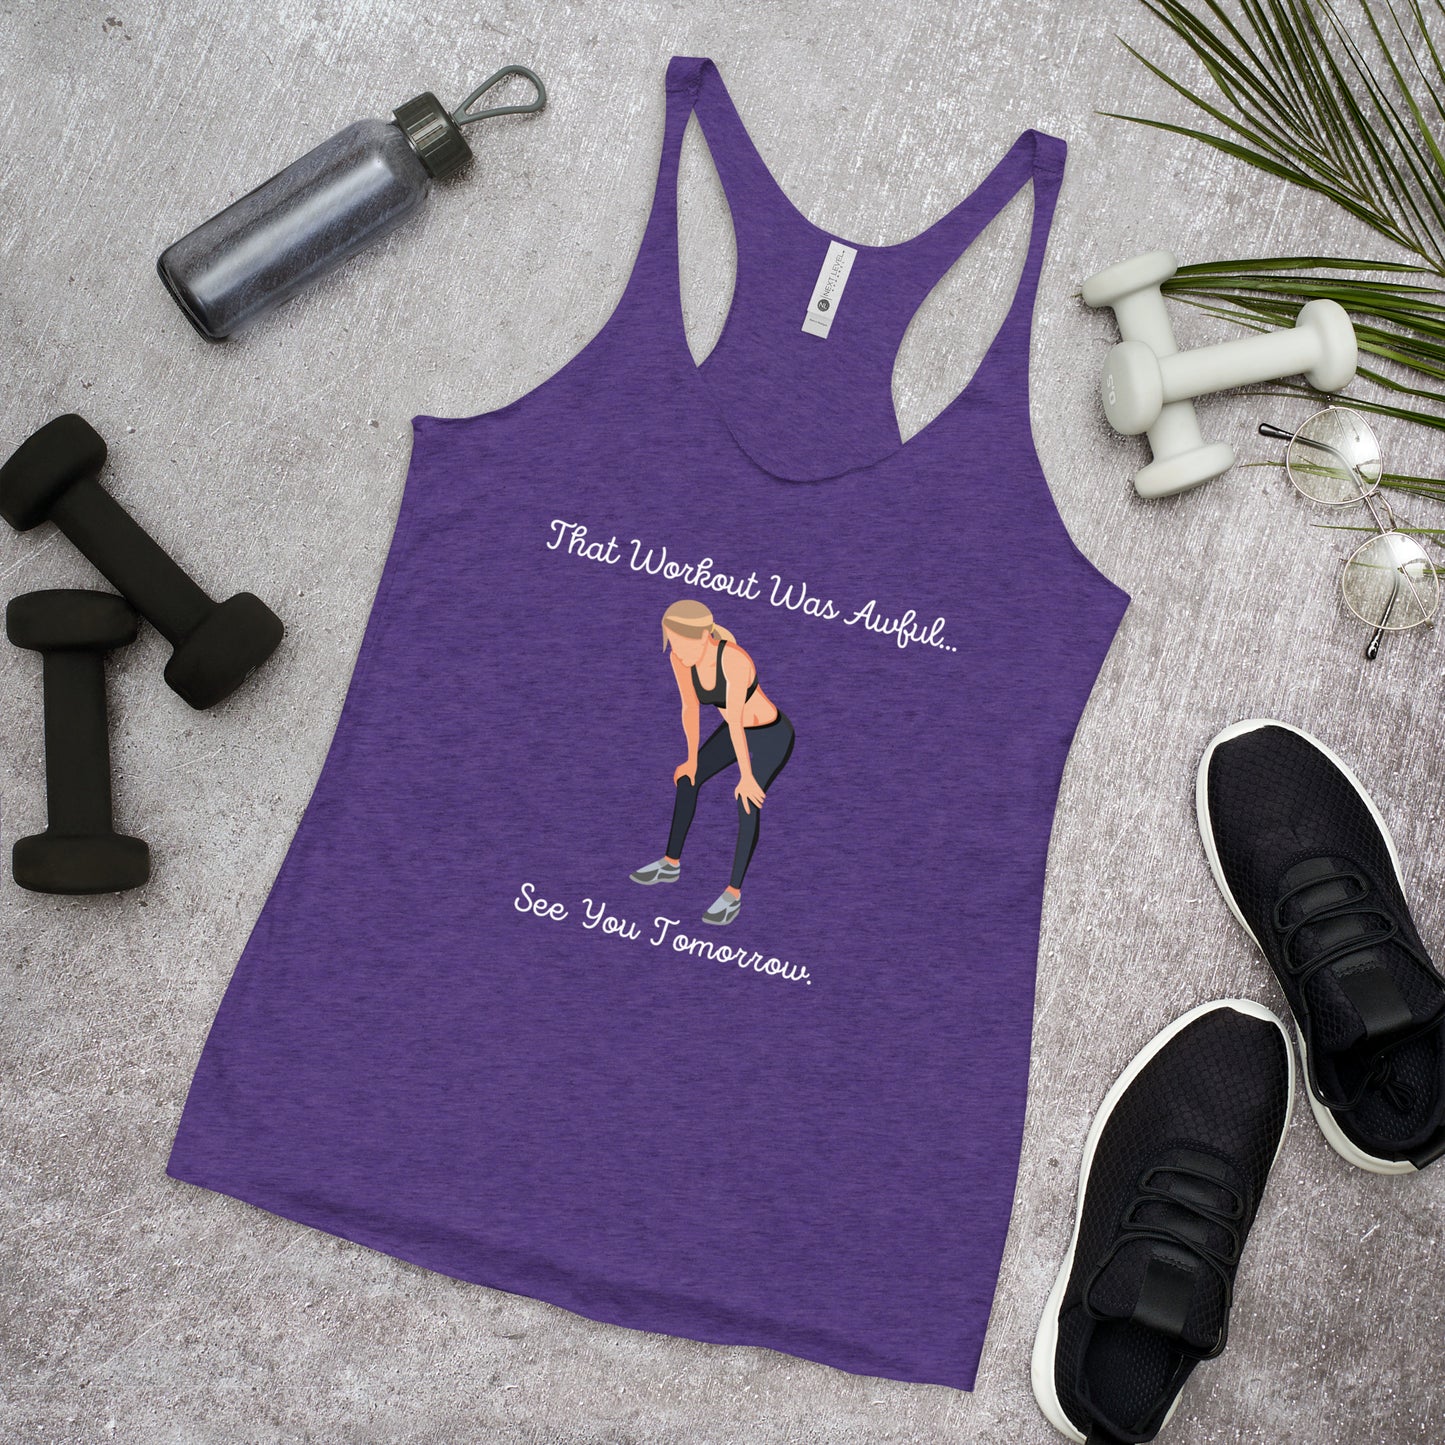 See you Tomorrow Funny Crossfit Tank Top, Crossfit Tank for Women, Workout Shirt for Women, Crossfit Gifts, Funny Gym